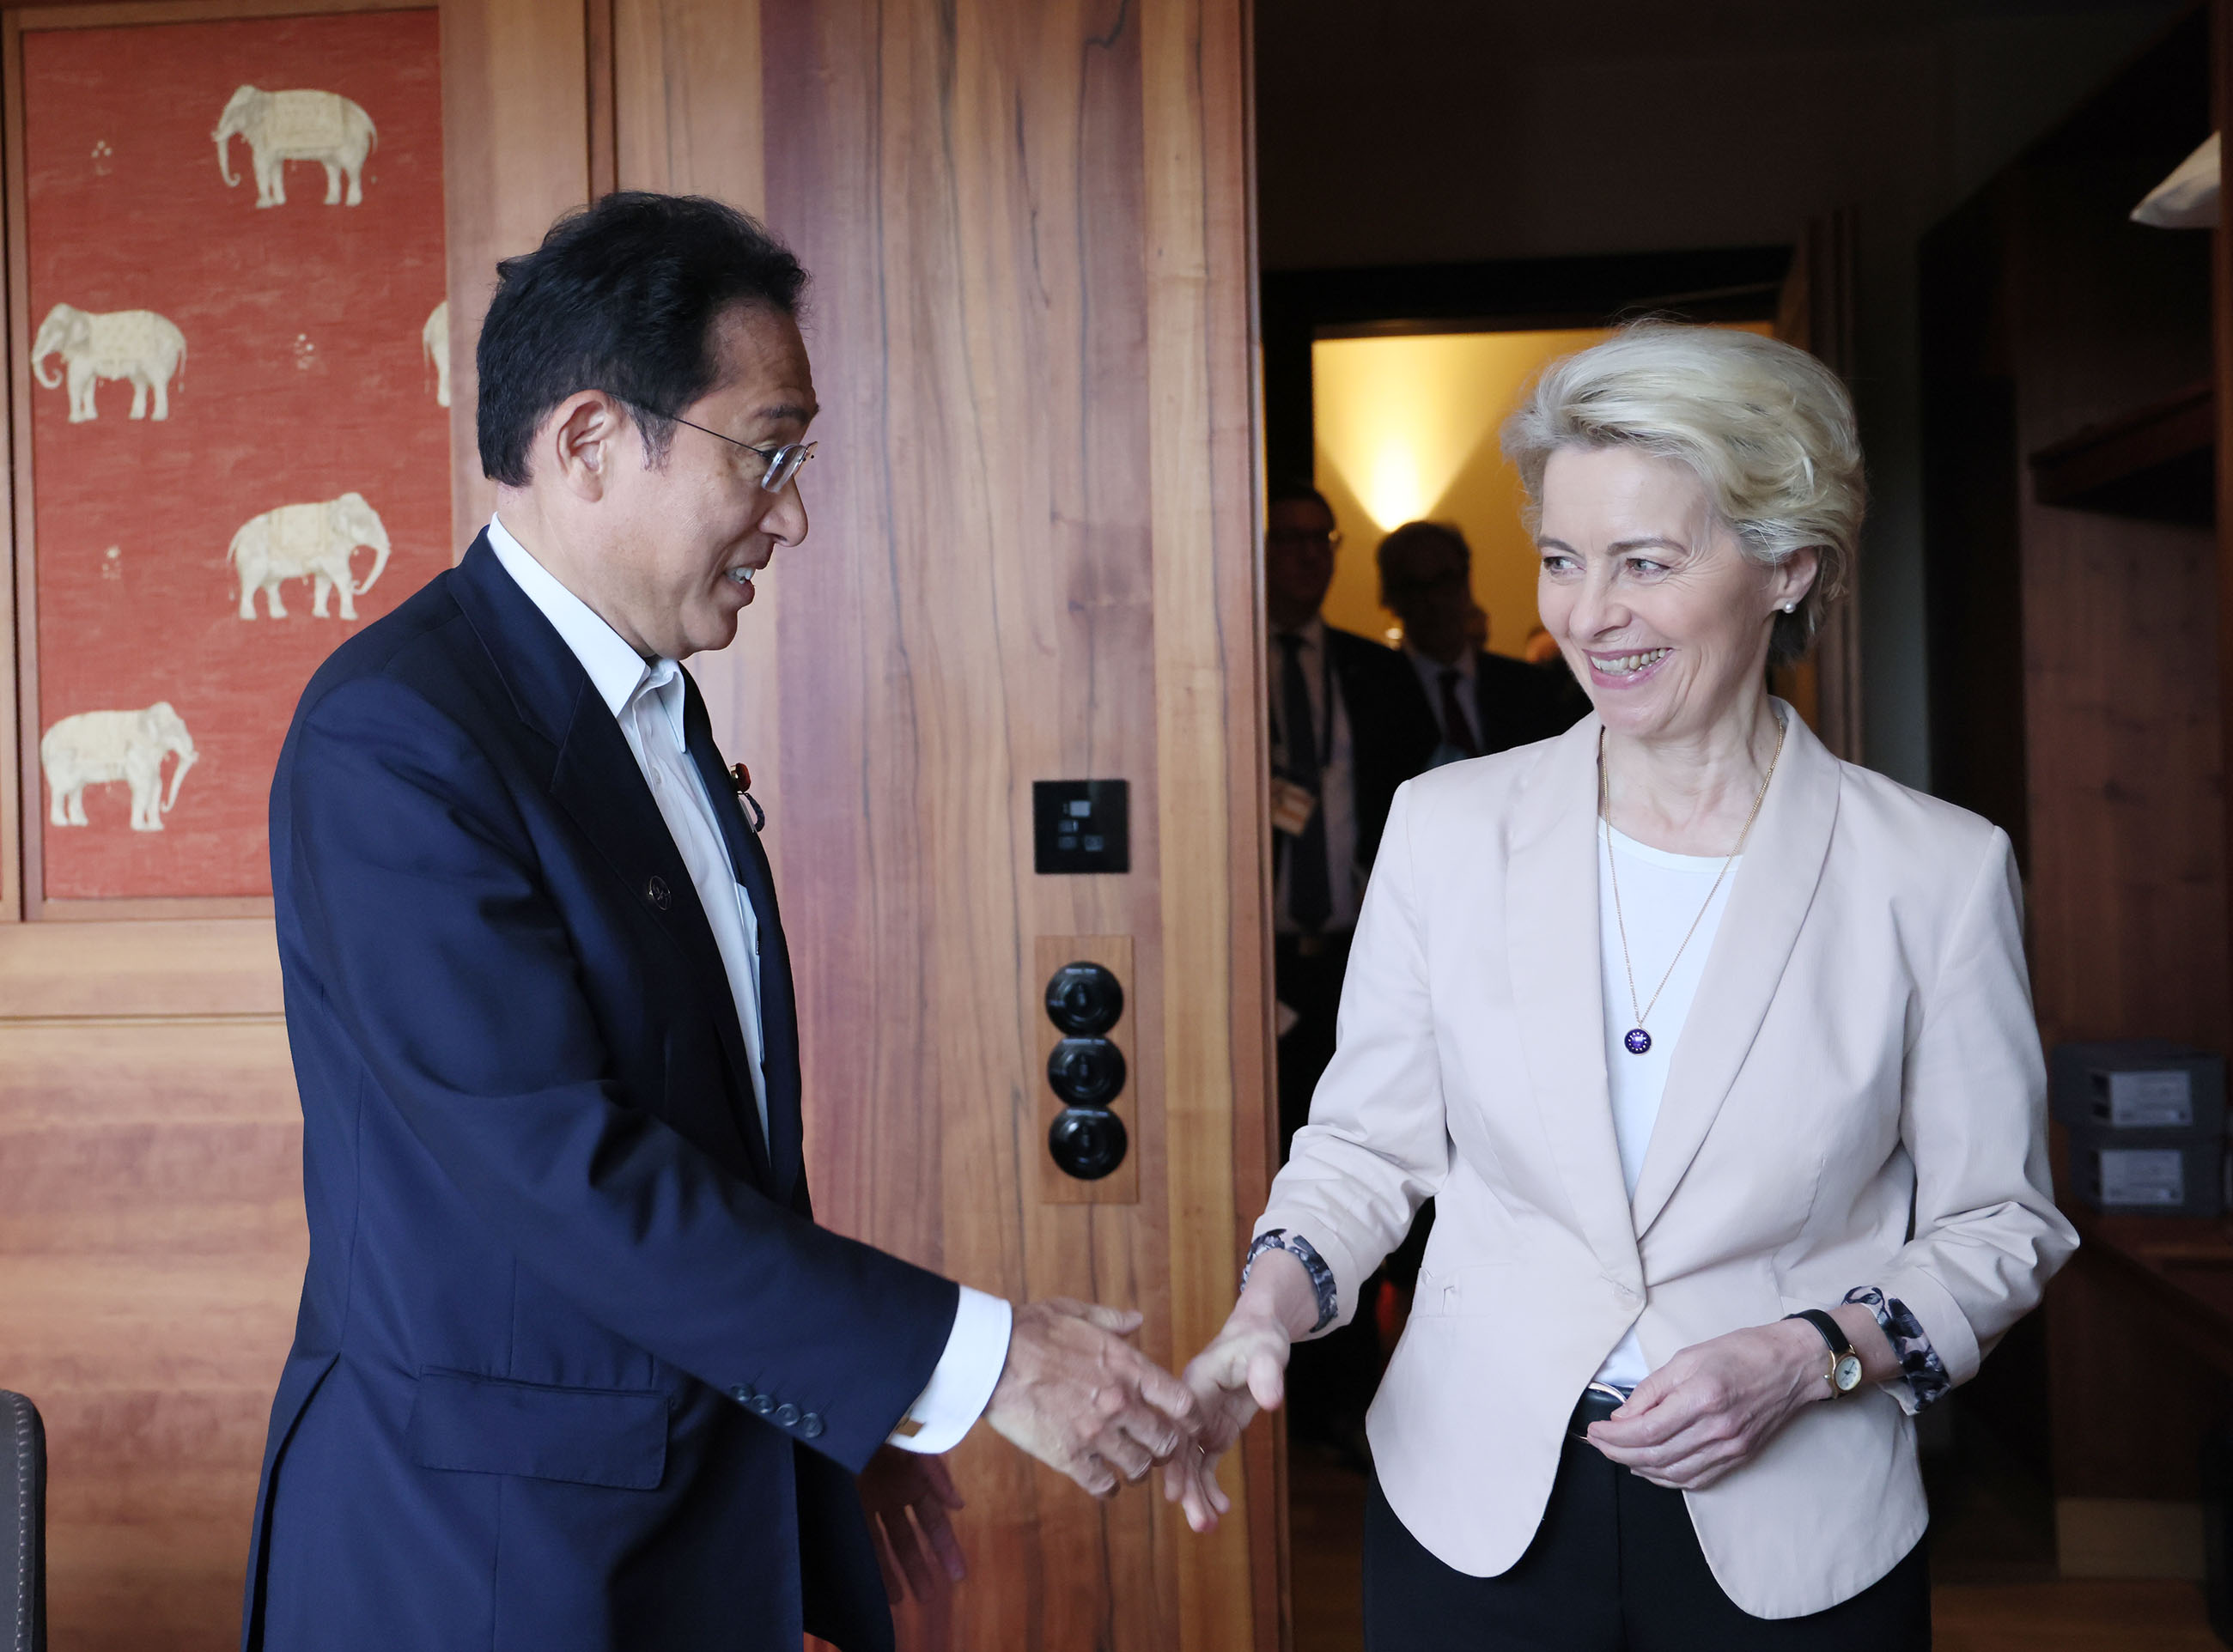 Photograph of the Prime Minister holding a meeting with European Commission President von der Leyen (1)